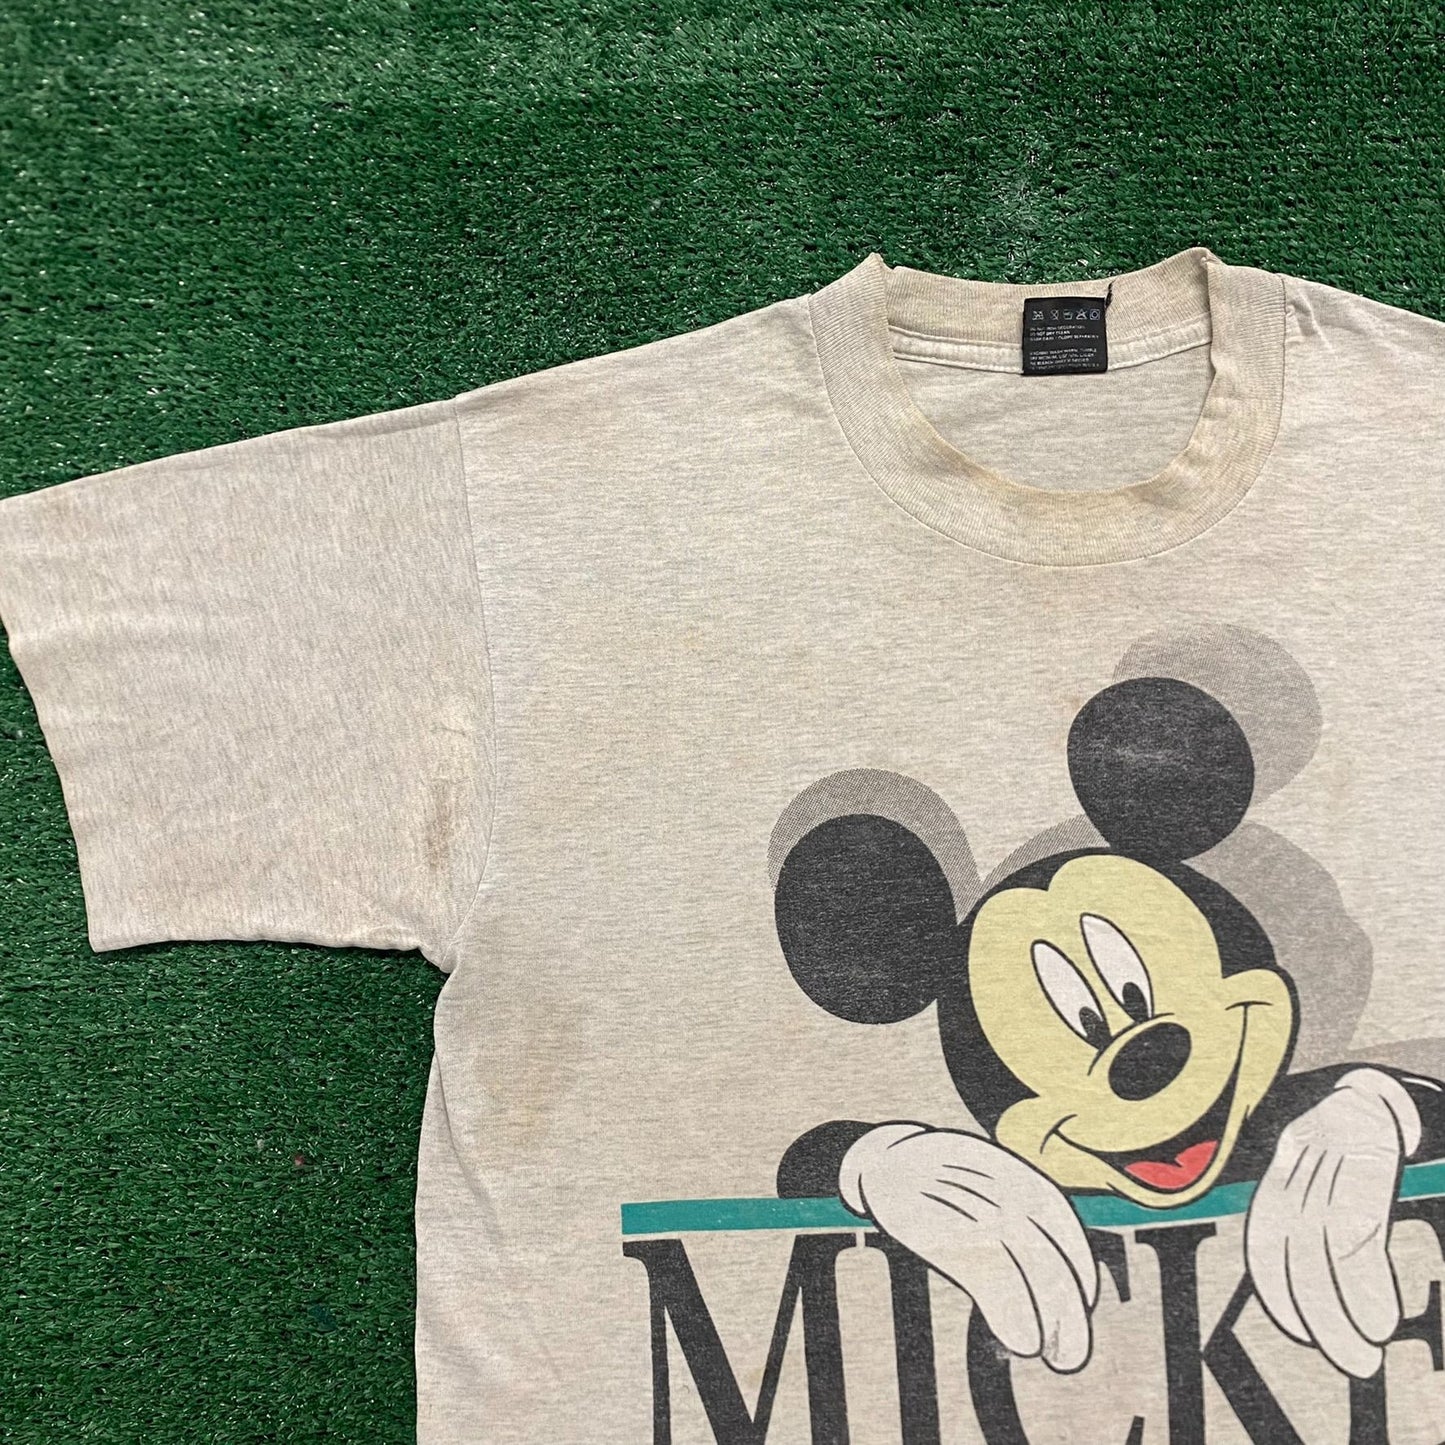 Vintage 90s Essential Mickey Mouse Single Stitch T-Shirt